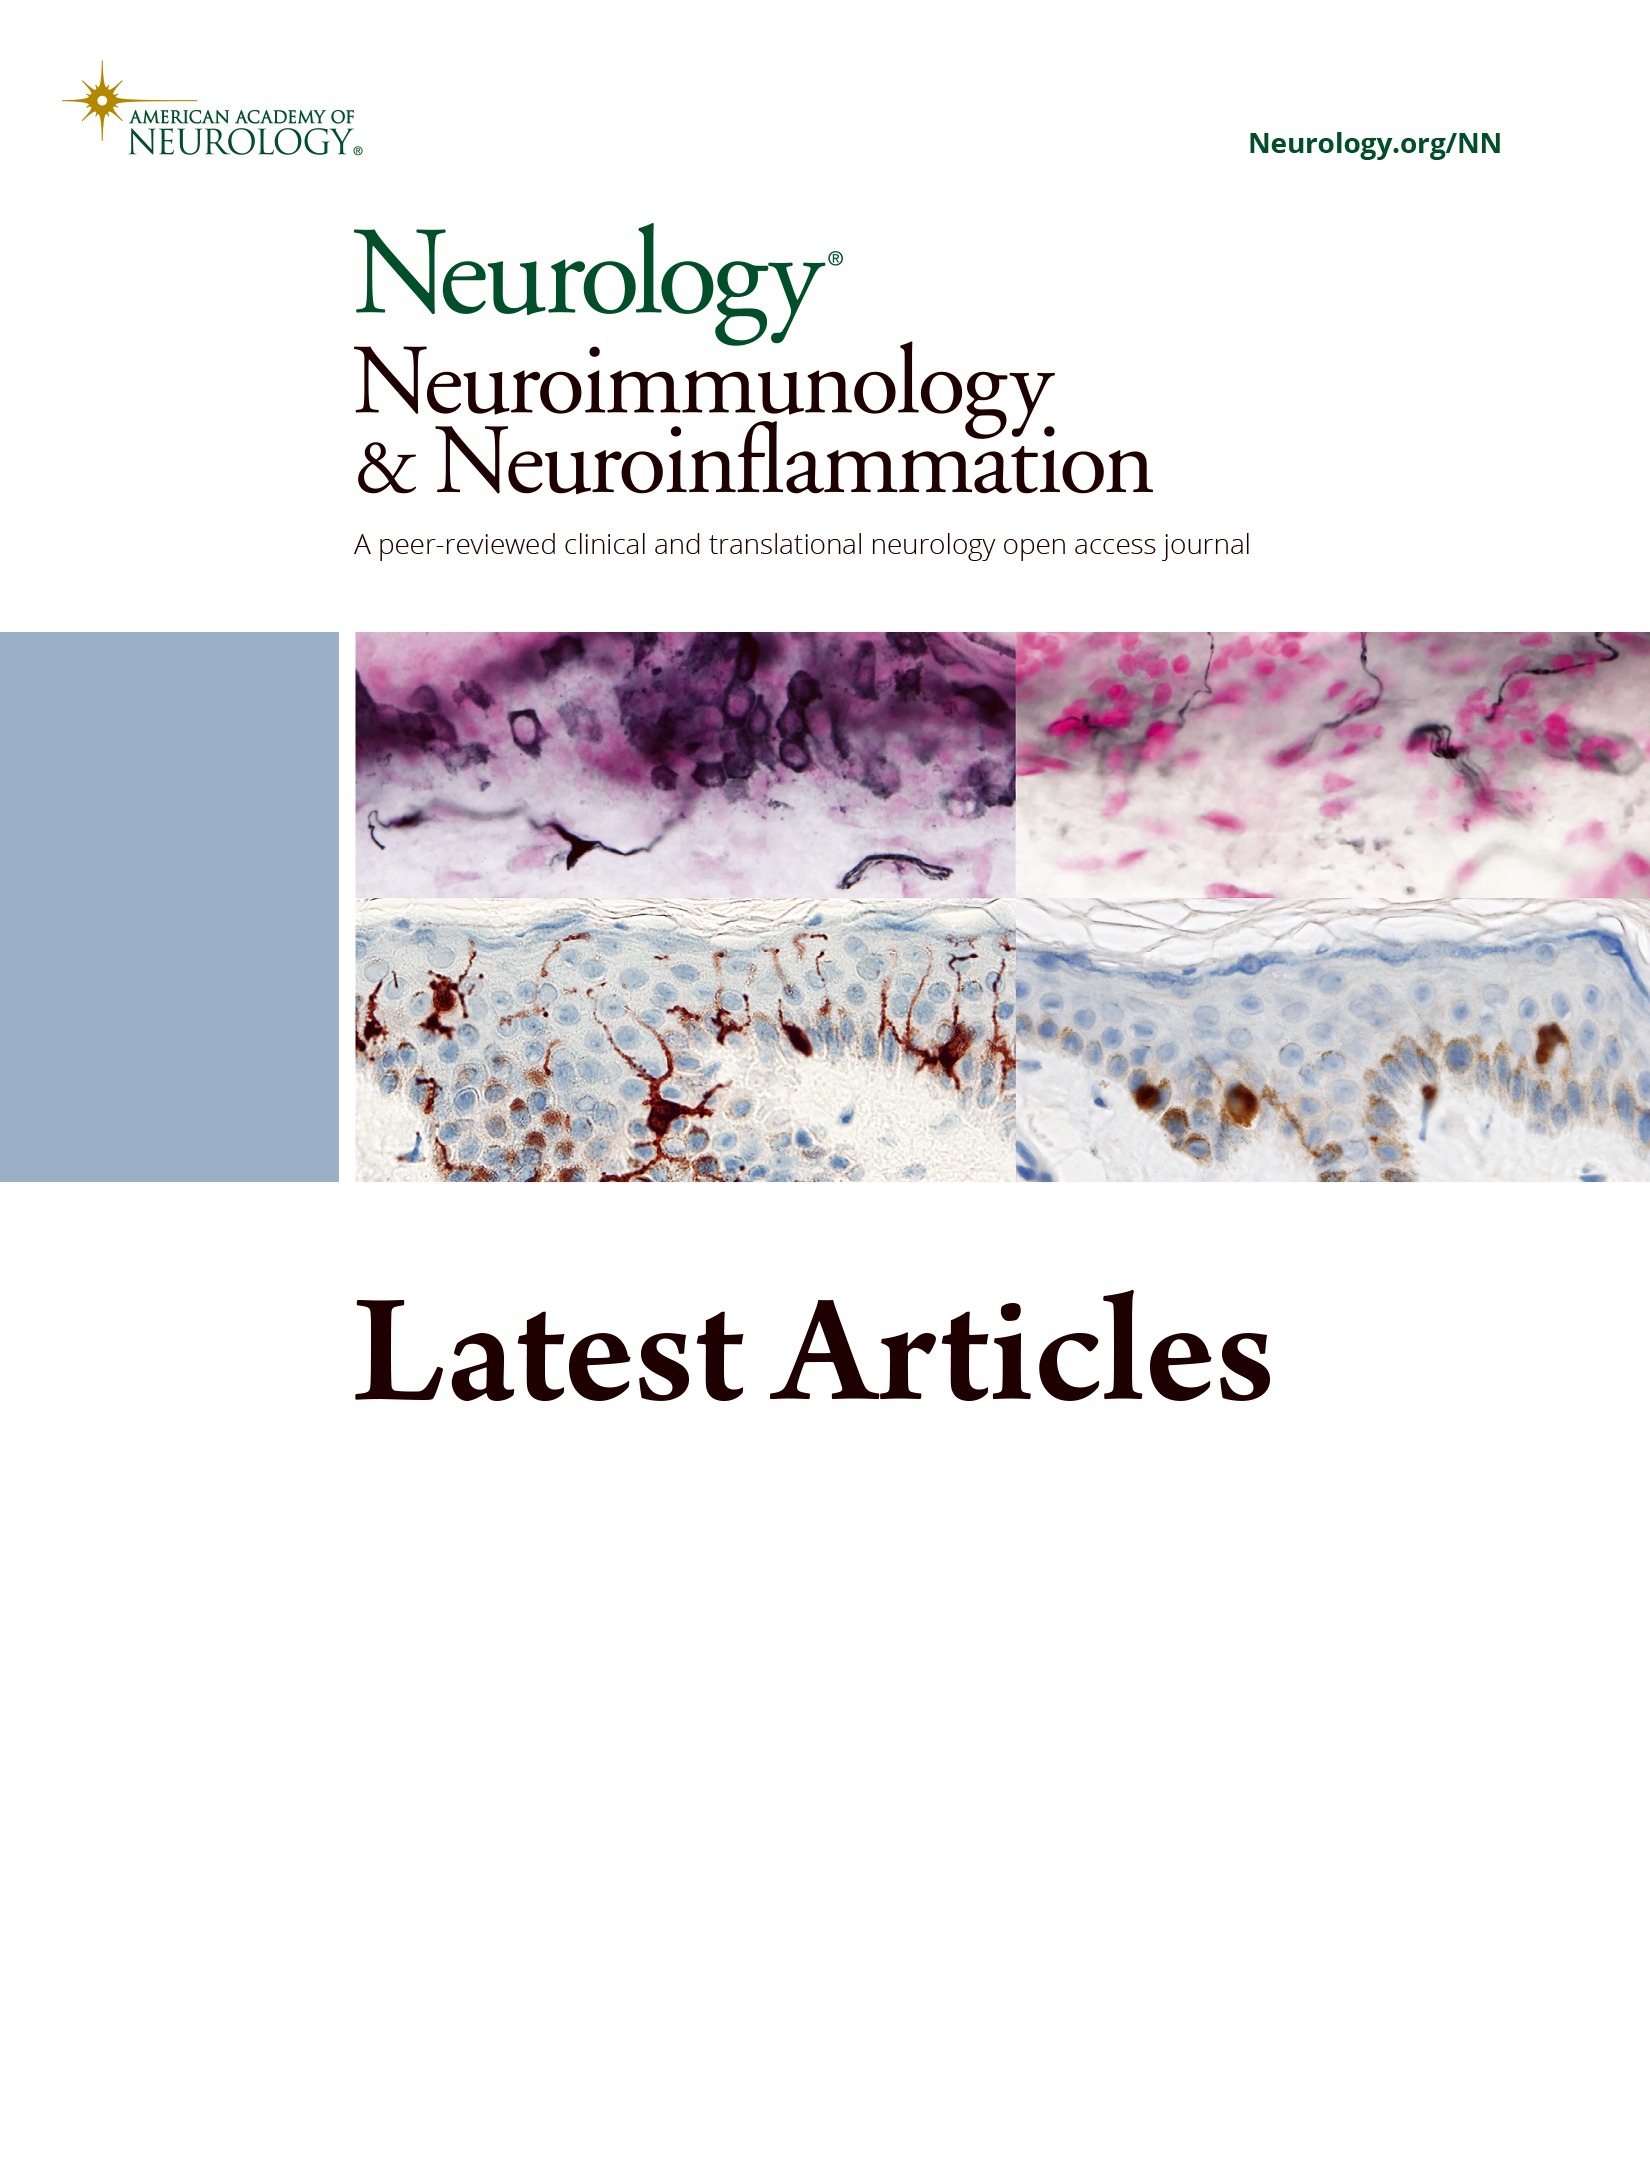 Immunotherapy-Responsive Neuropathic Pain and Allodynia in a Patient With Glycine Receptor Autoantibodies: A Case Report